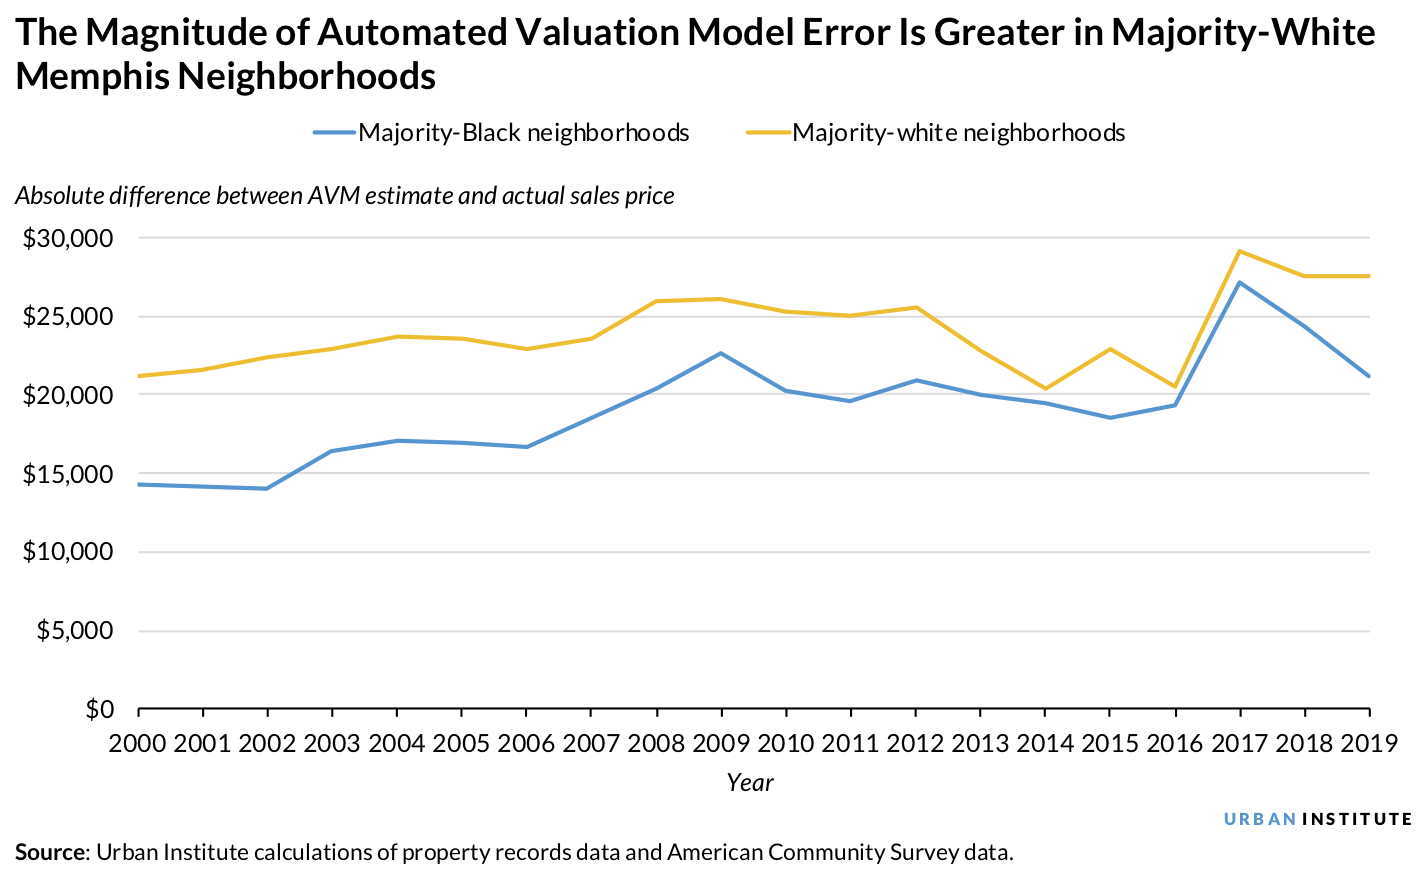 Line chart showing the magnitude of automated valuation model error is greater in majority-white Memphis nieghborhoods